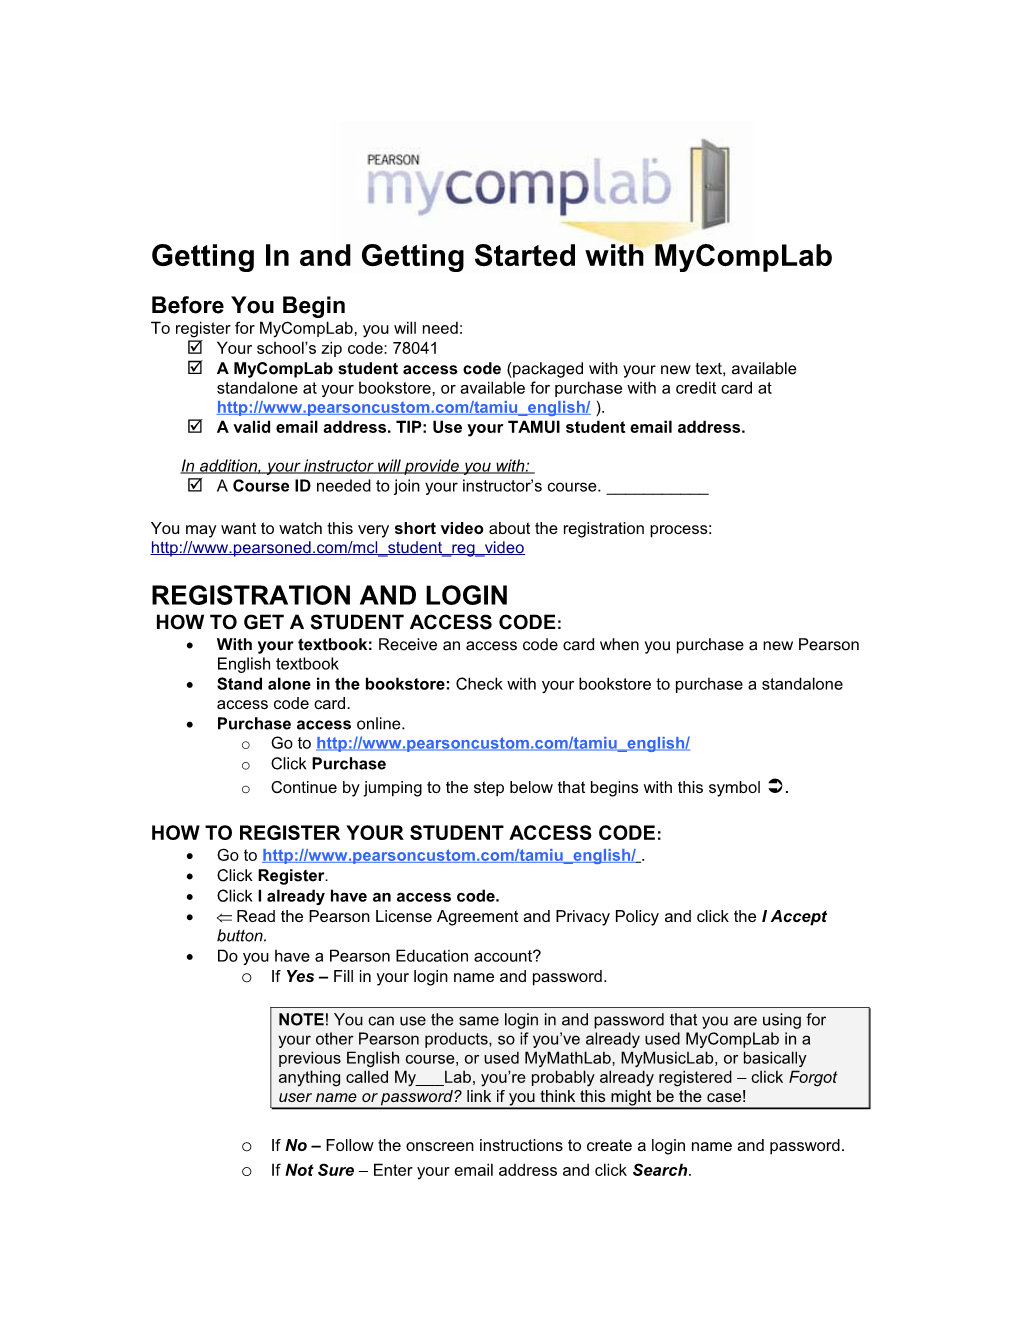 Getting in and Getting Started with Mycomplab